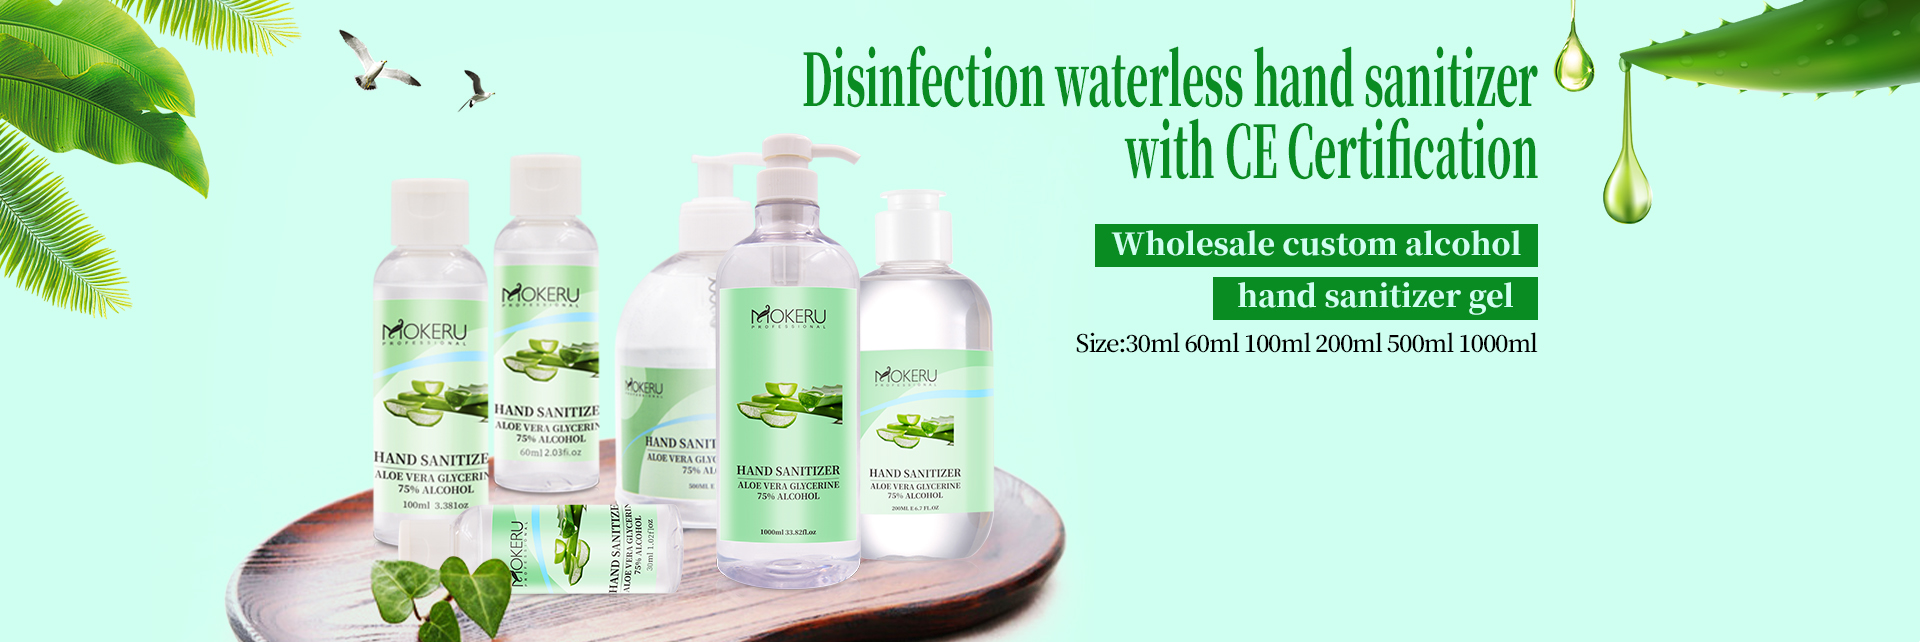 Waterless disinfection alcohol hand sanitizer